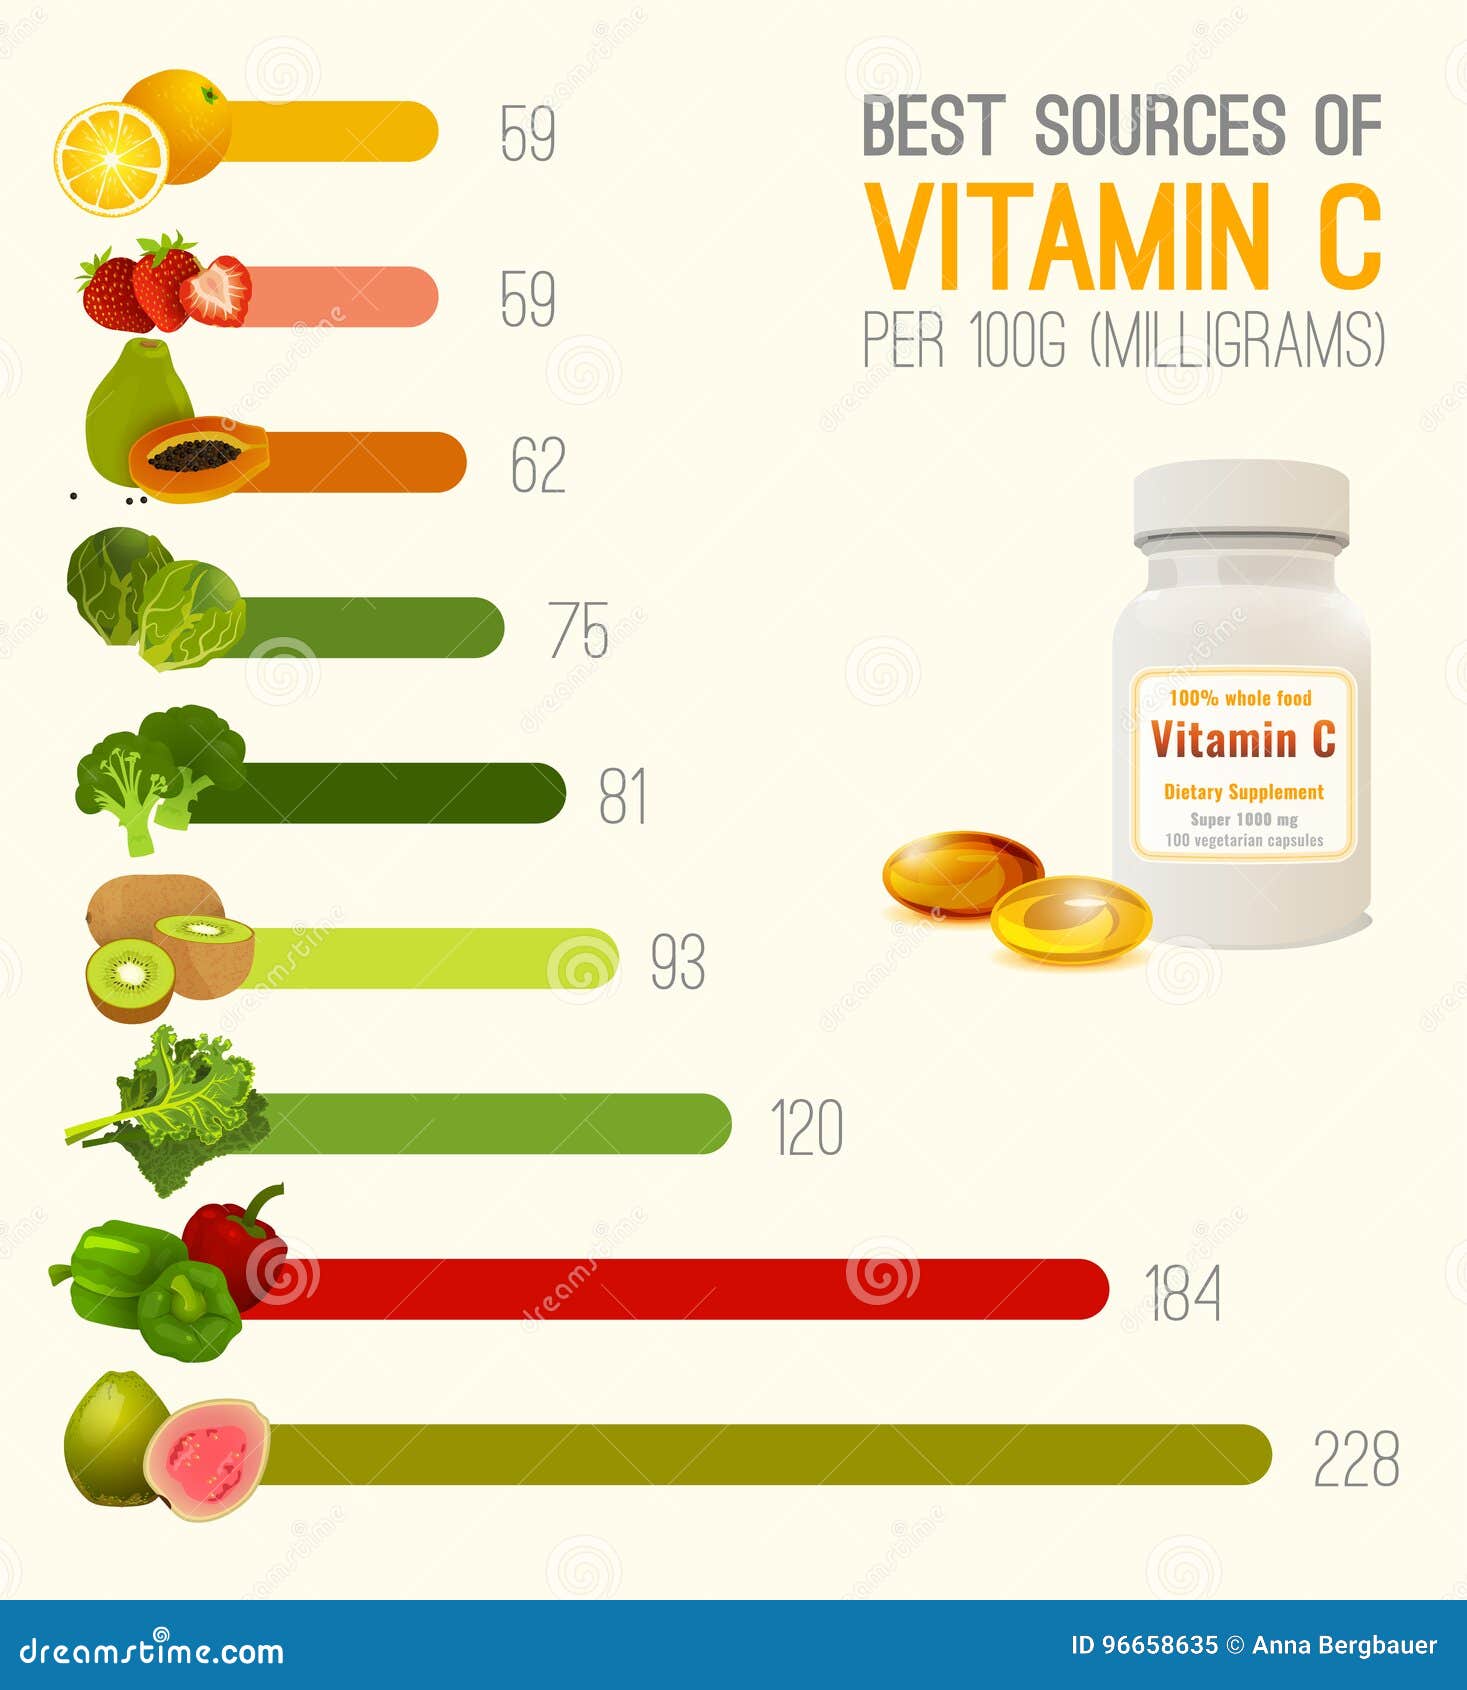 What Foods Have The Highest Amount Of Vitamin C